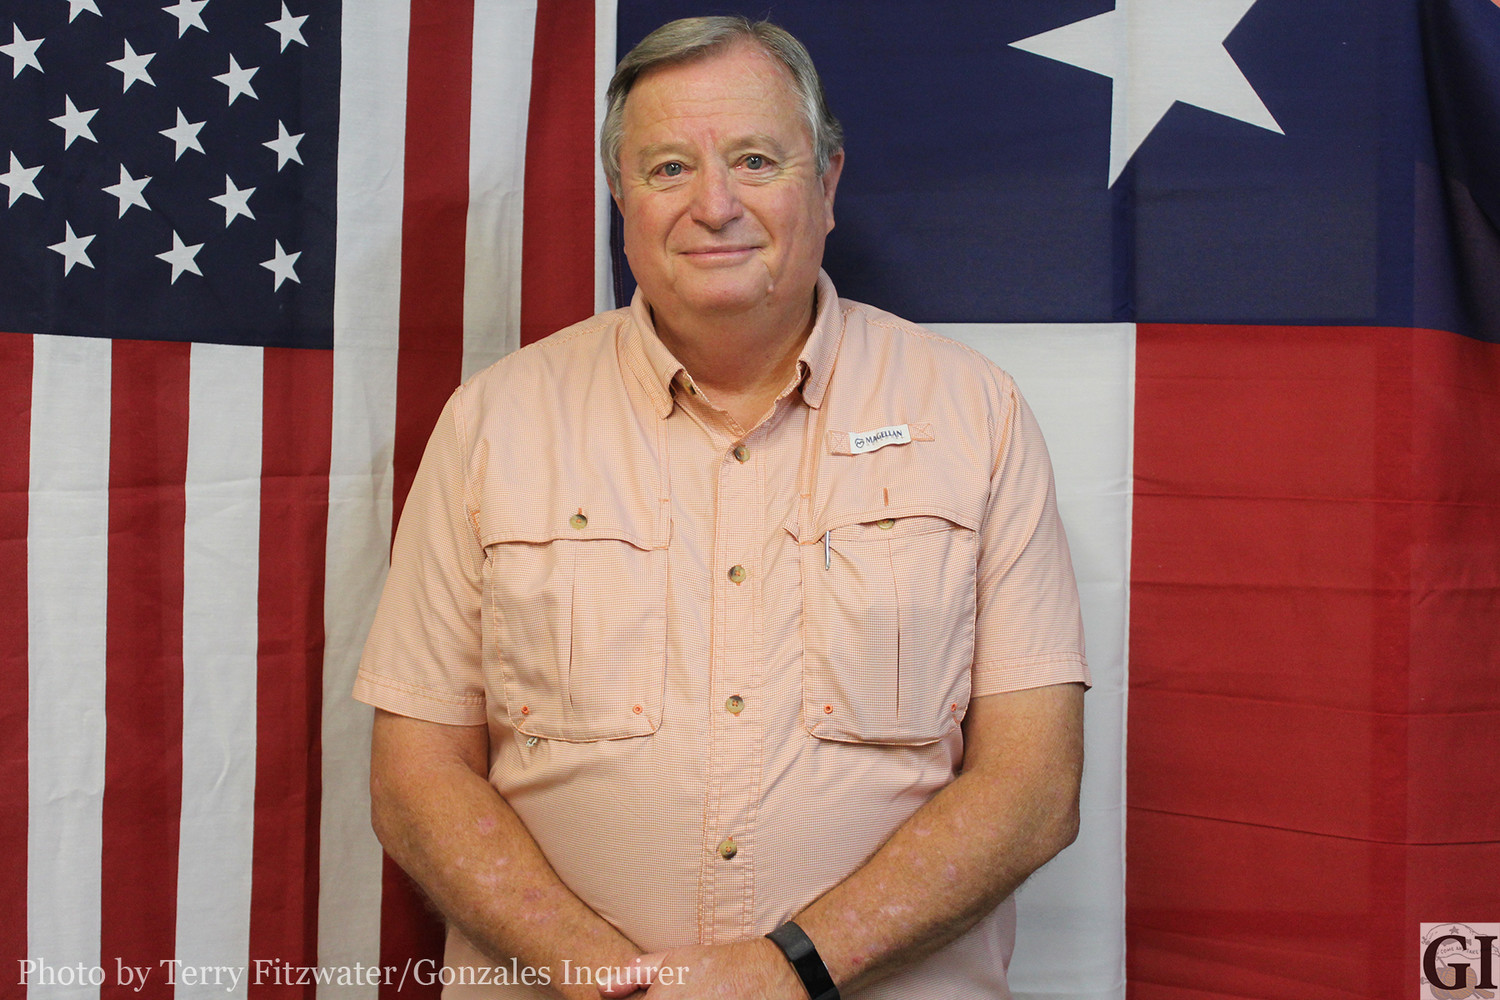 After leaving the Navy in early 1972, Bobby Berger returned to Texas and began his professional career. Berger had various jobs, including working for at Austin Pump and Supply, the Gonzales sewer department, finance director at Gonzales and city manager for Moulton and Luling.